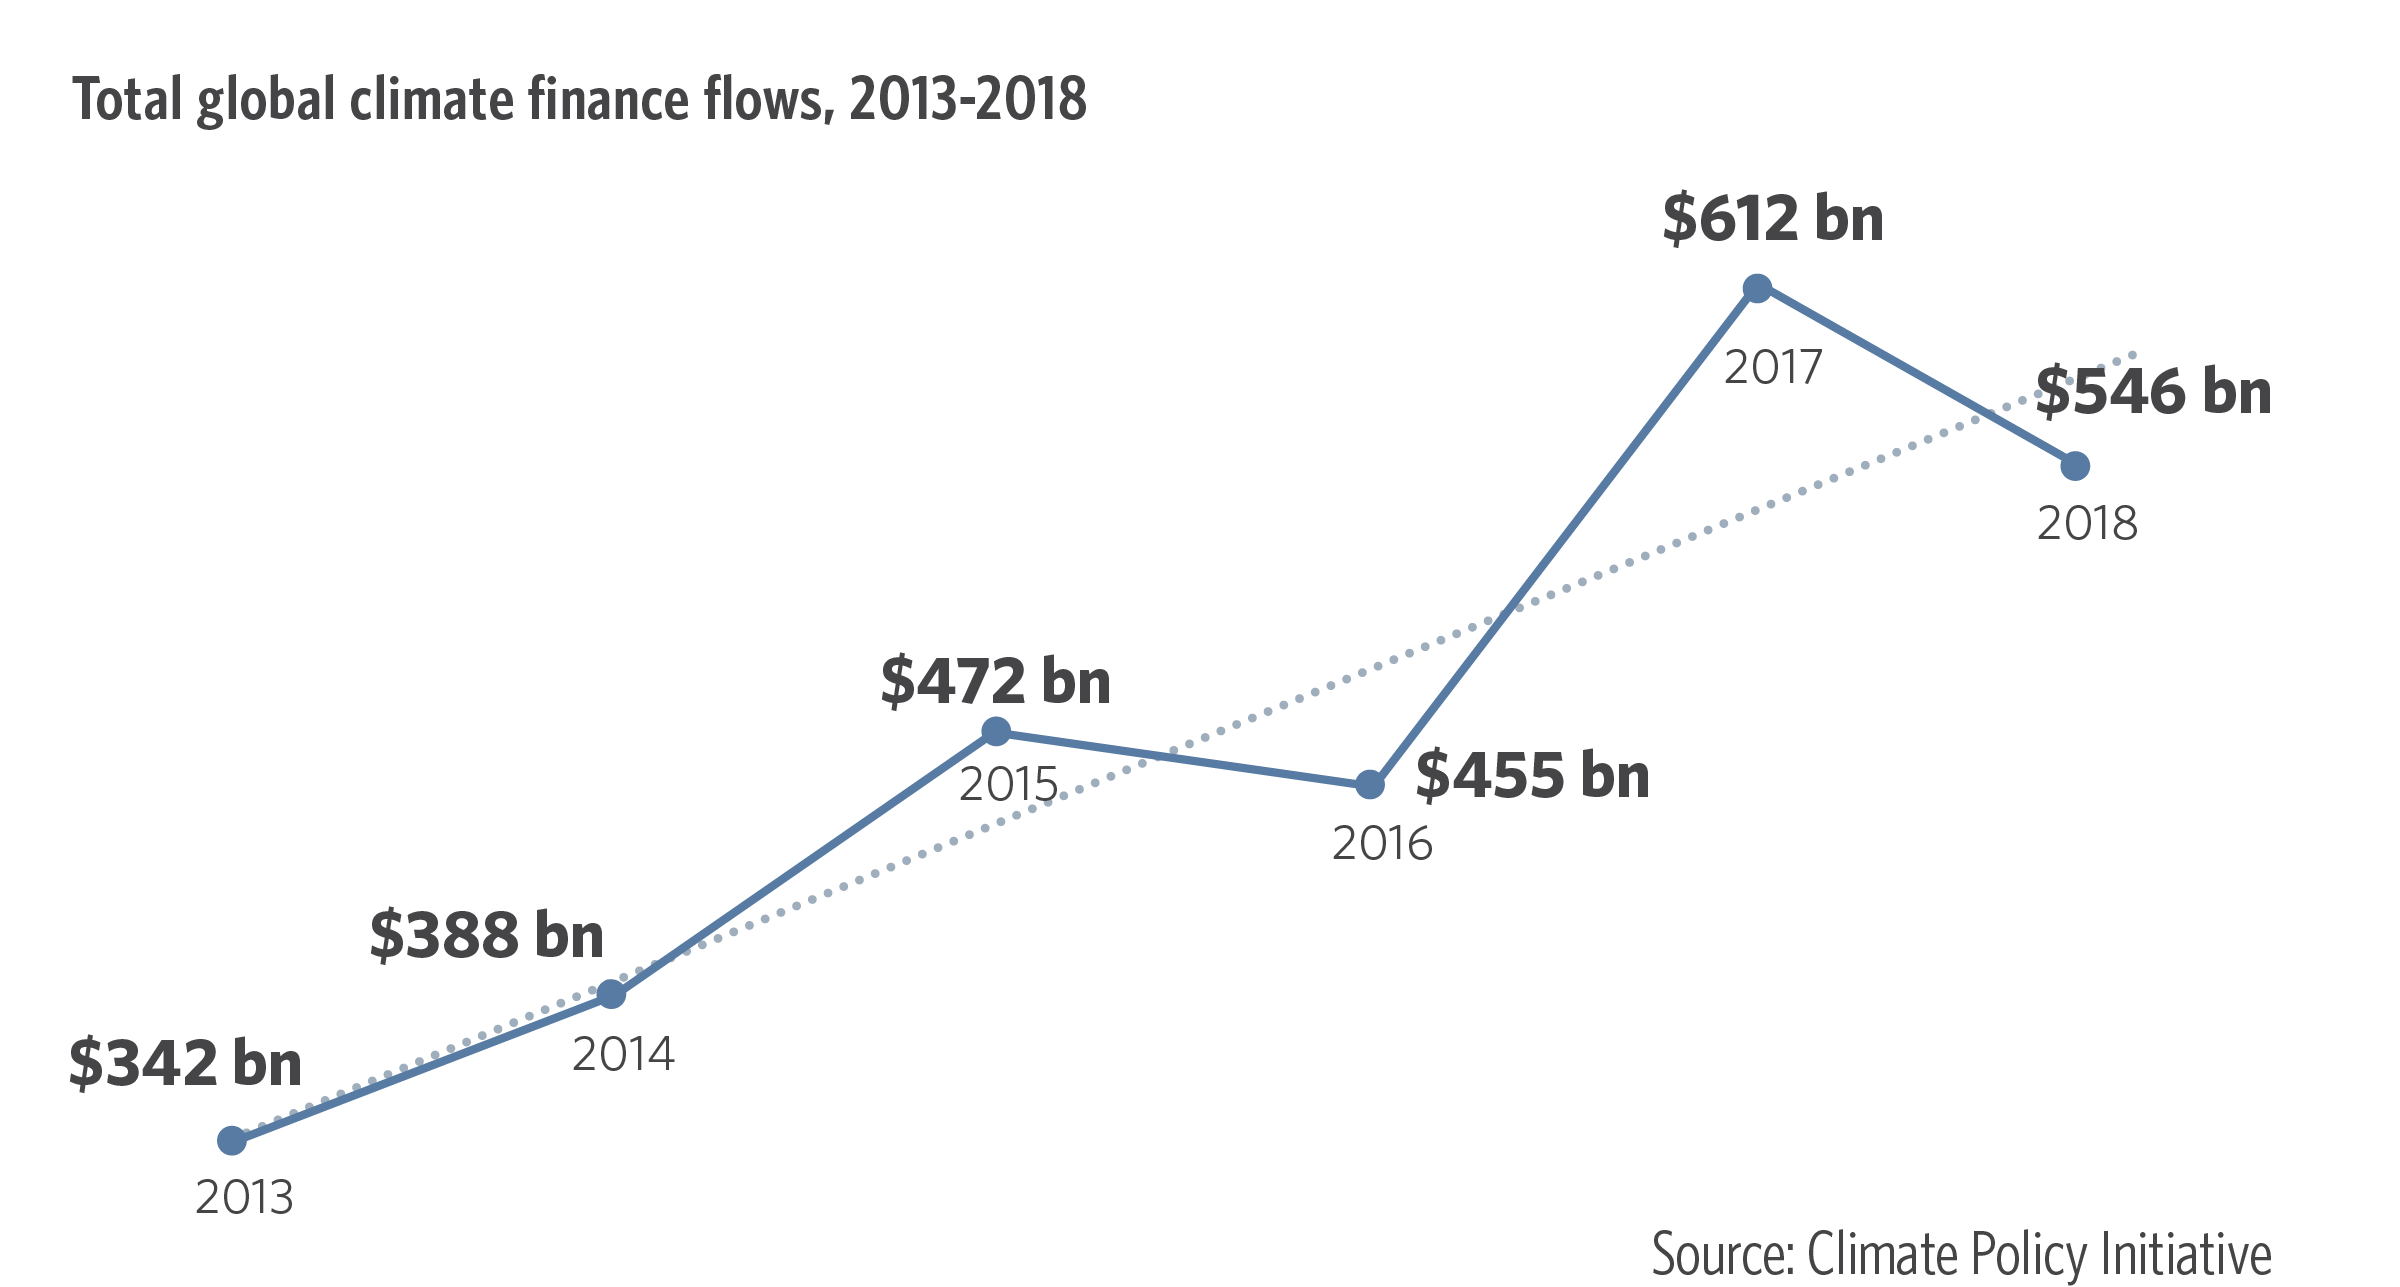 Total global climate finance flows 2013-2018 / Credit: Climate Policy Initiative